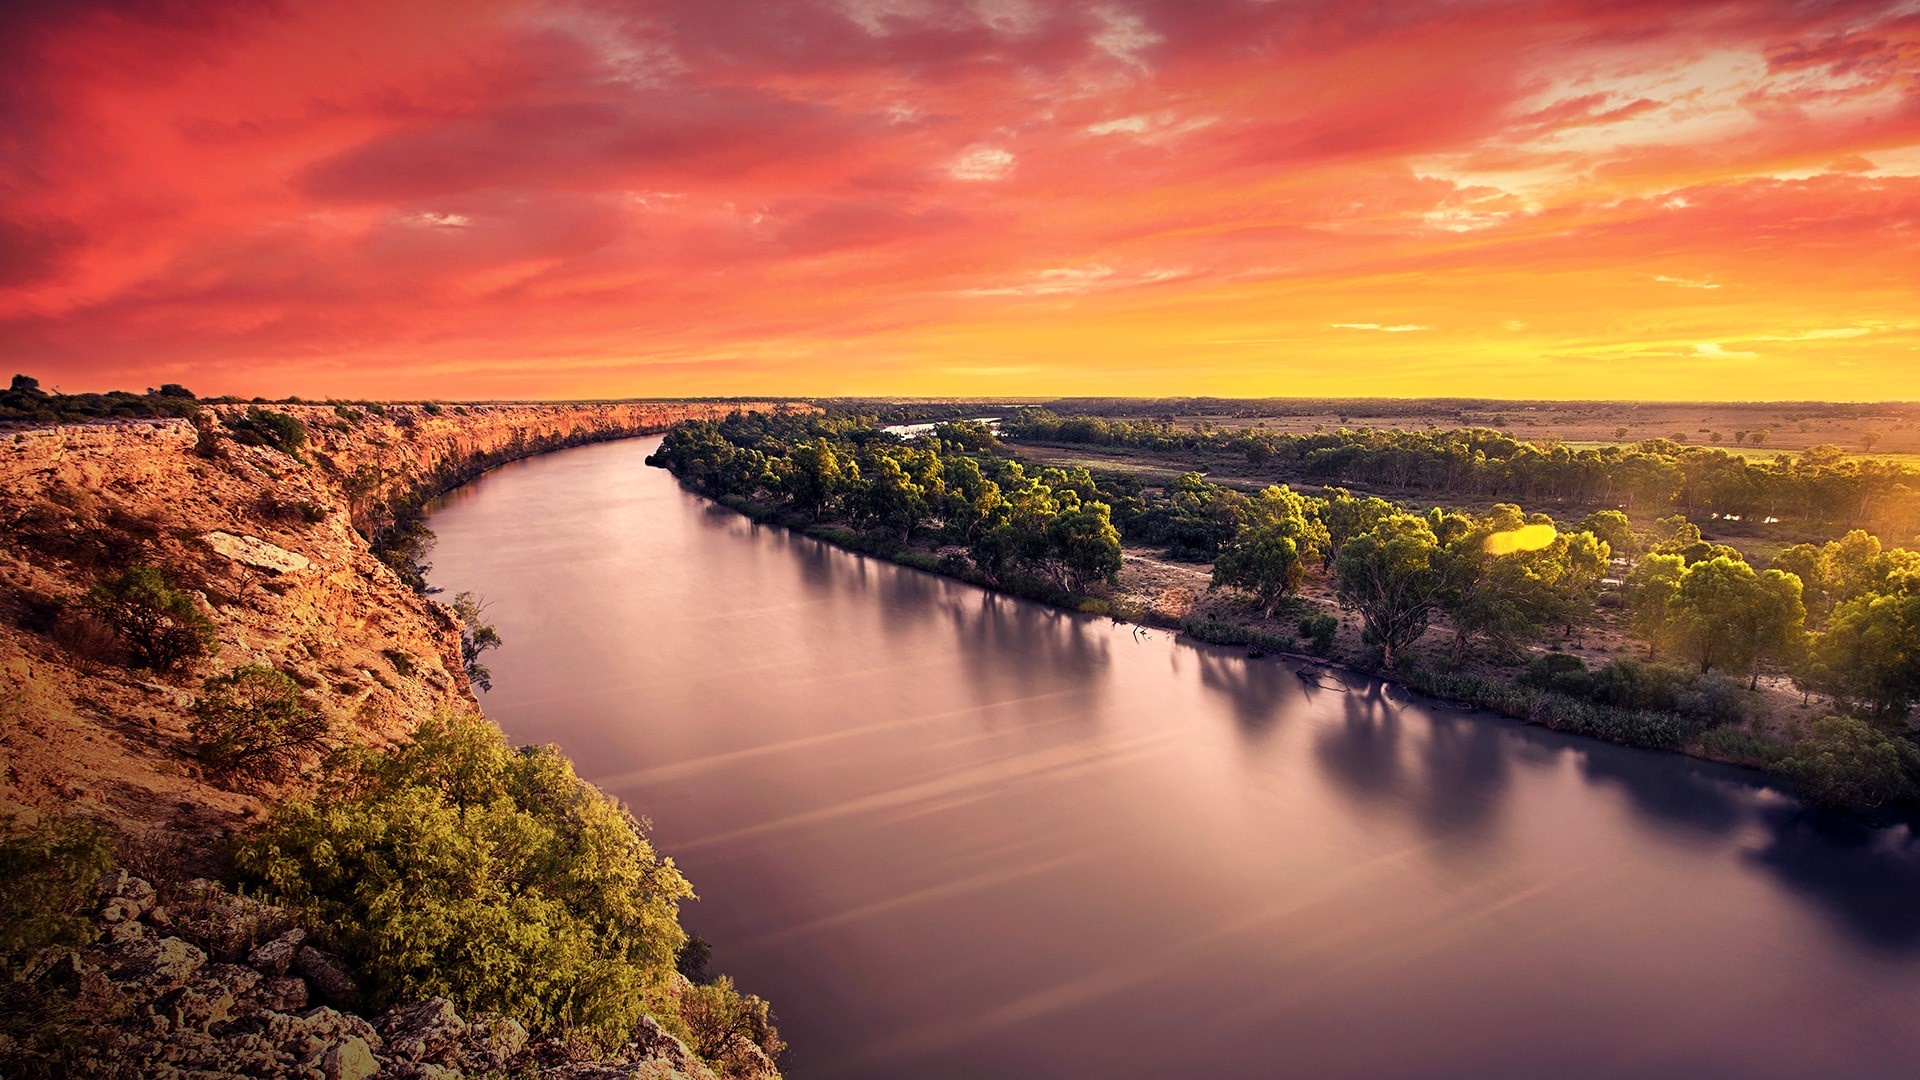 The Murray River, Travels, Captivating sunset, Reflection on water, 1920x1080 Full HD Desktop